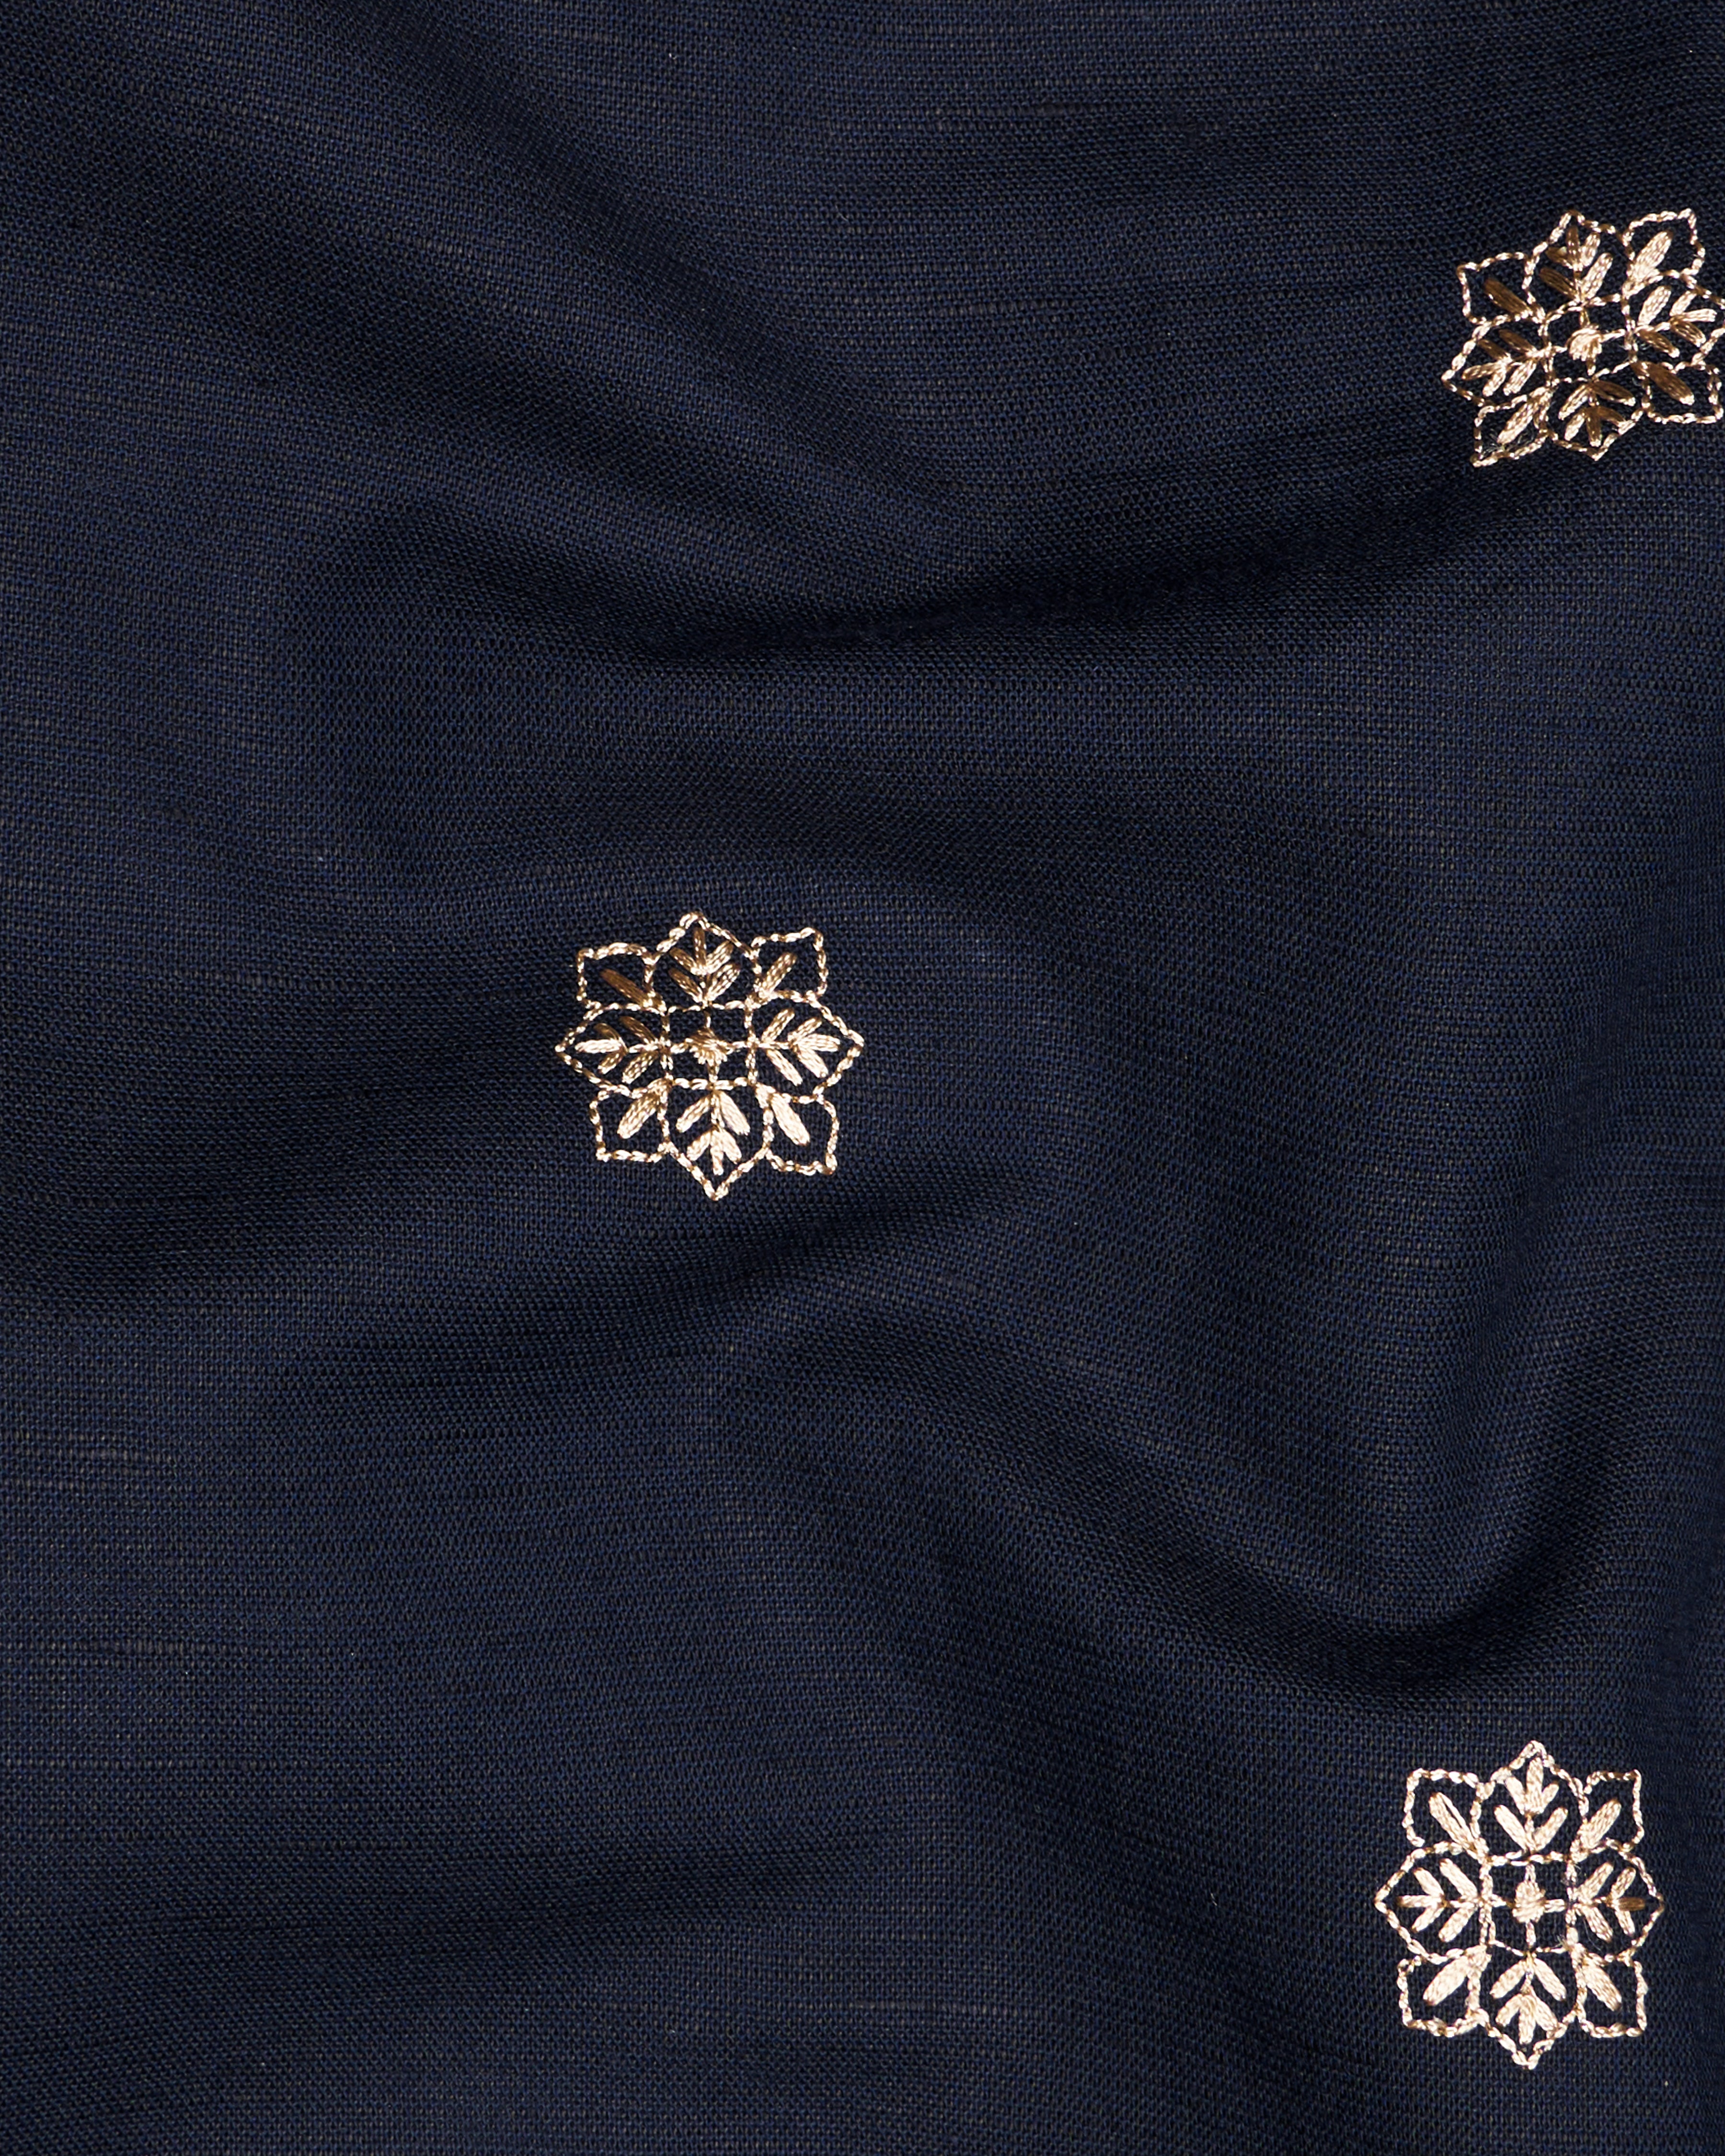 Mirage Navy Blue with Embroidered Luxurious Linen Shirt 9827-CA-BLK-38, 9827-CA-BLK-H-38, 9827-CA-BLK-39, 9827-CA-BLK-H-39, 9827-CA-BLK-40, 9827-CA-BLK-H-40, 9827-CA-BLK-42, 9827-CA-BLK-H-42, 9827-CA-BLK-44, 9827-CA-BLK-H-44, 9827-CA-BLK-46, 9827-CA-BLK-H-46, 9827-CA-BLK-48, 9827-CA-BLK-H-48, 9827-CA-BLK-50, 9827-CA-BLK-H-50, 9827-CA-BLK-52, 9827-CA-BLK-H-52